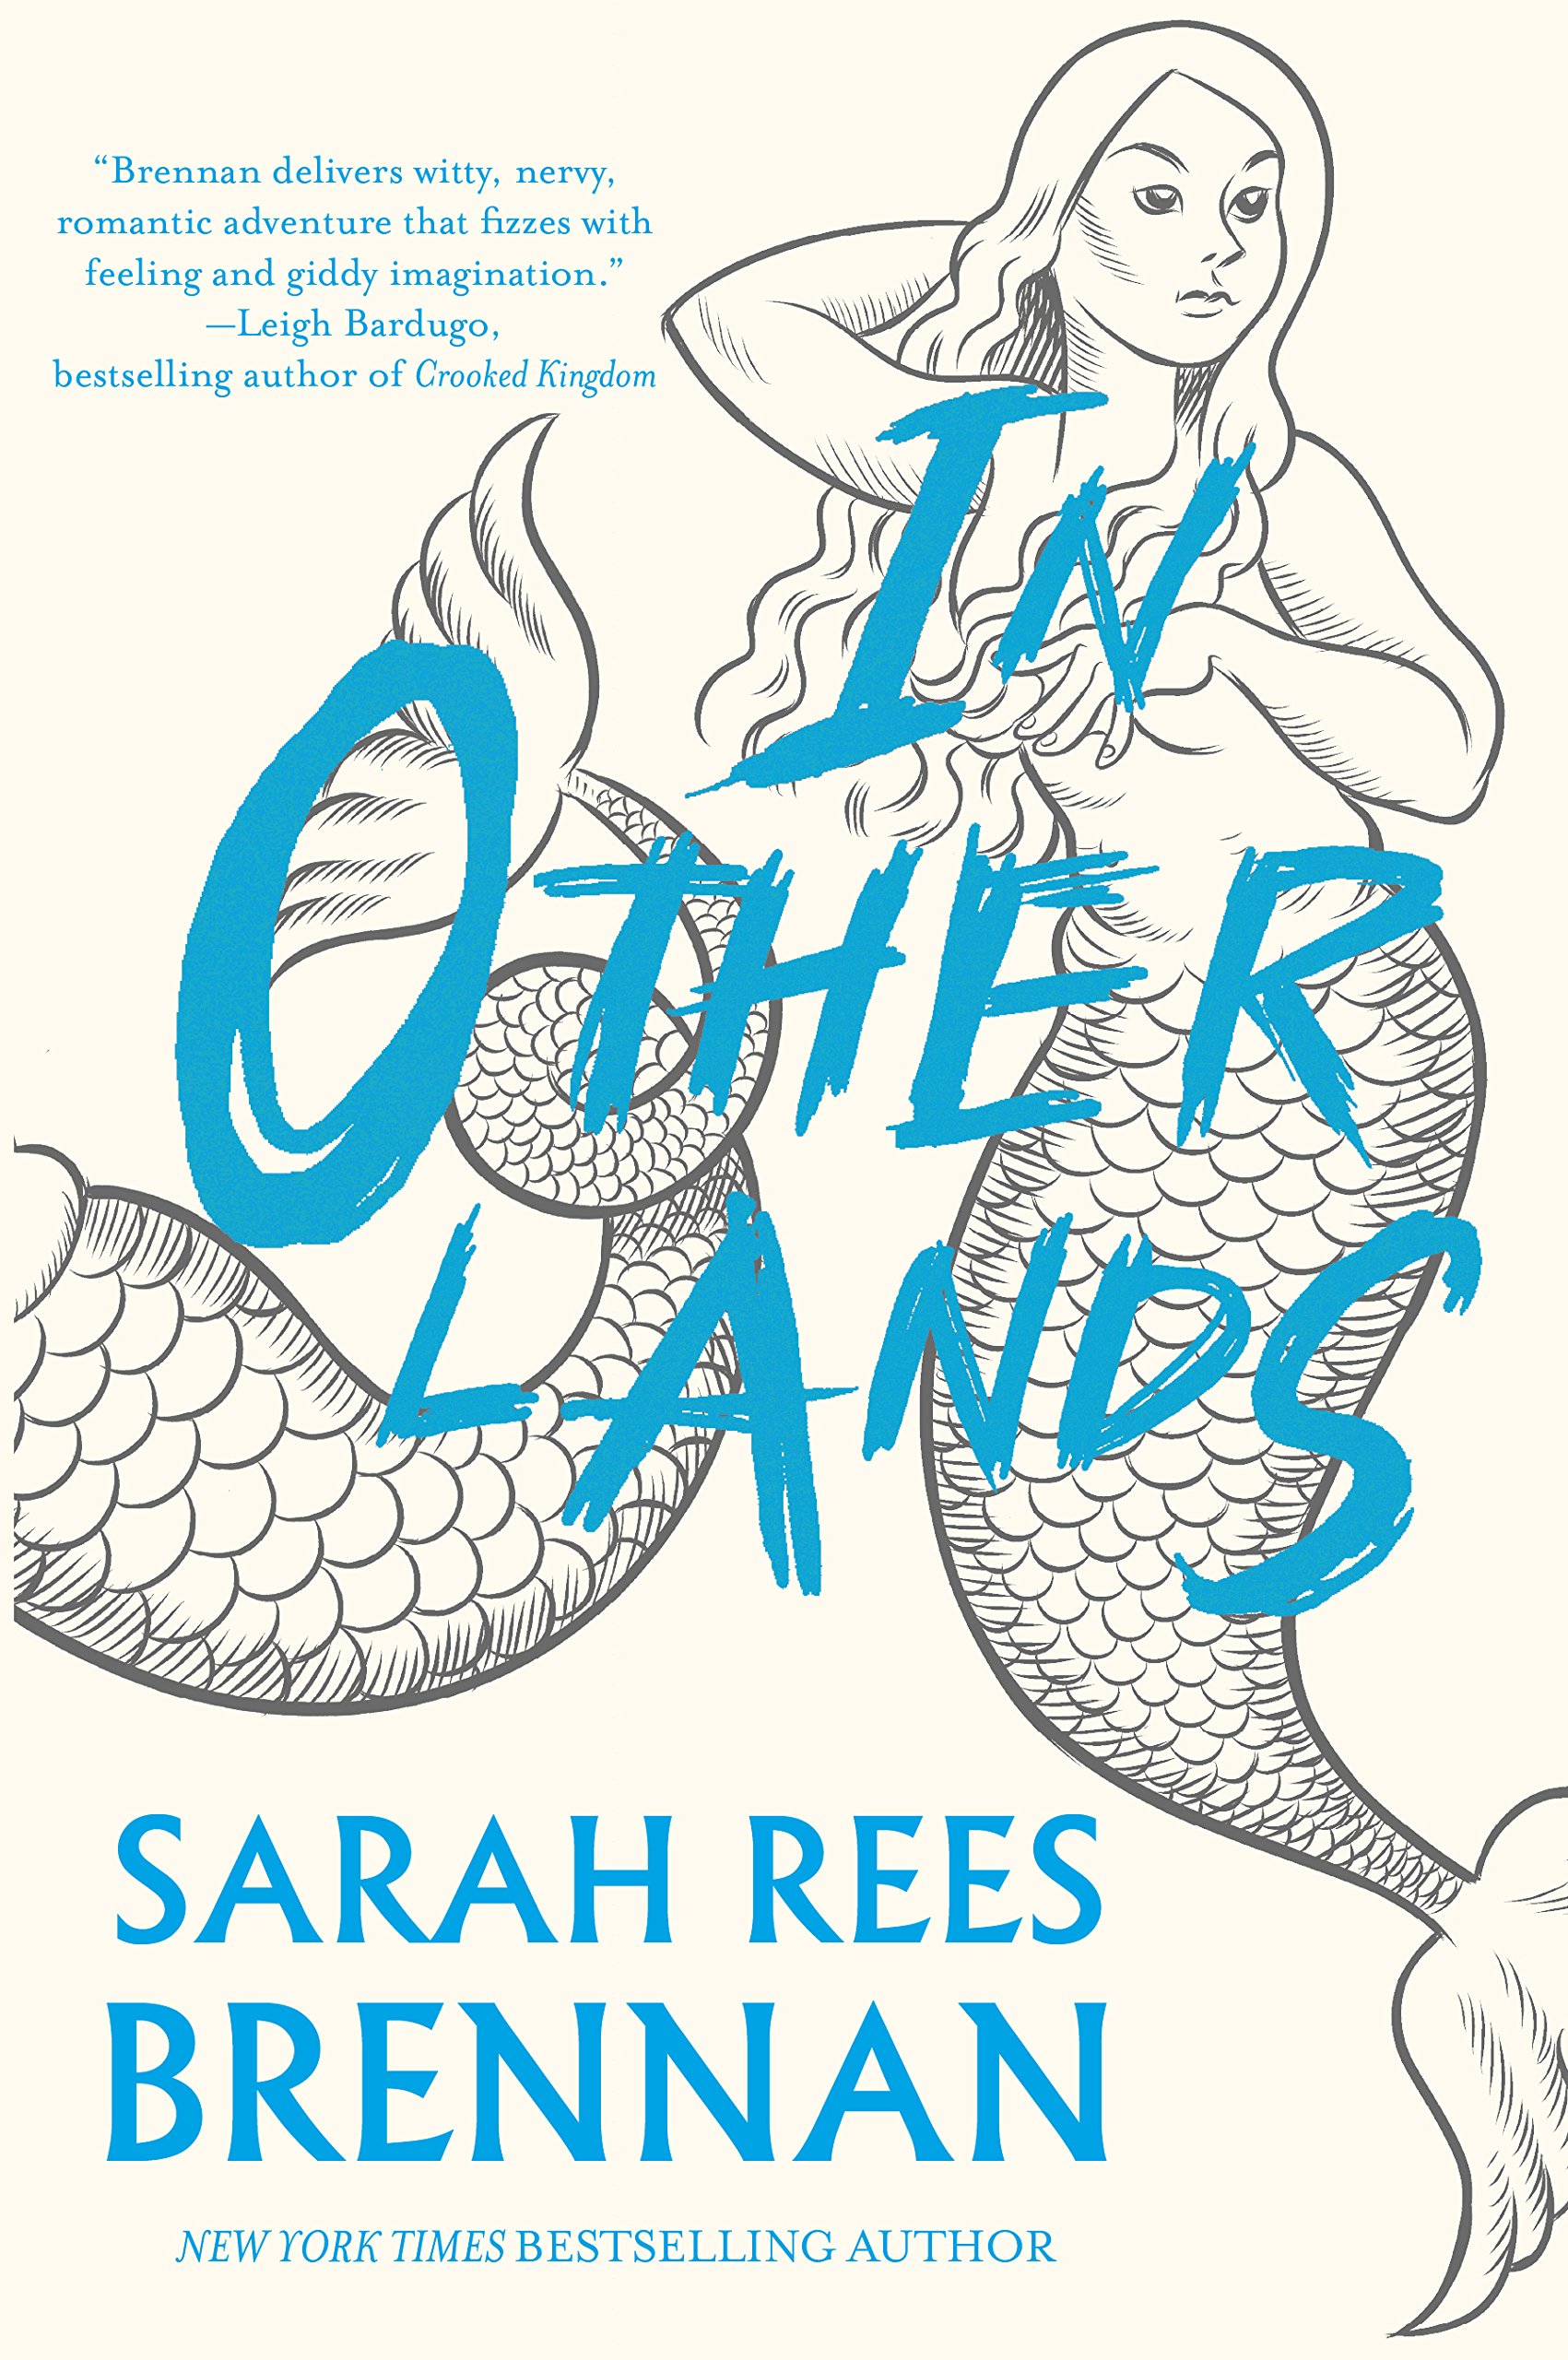 The cover of In Other Lands by Sarah Rees Brennan